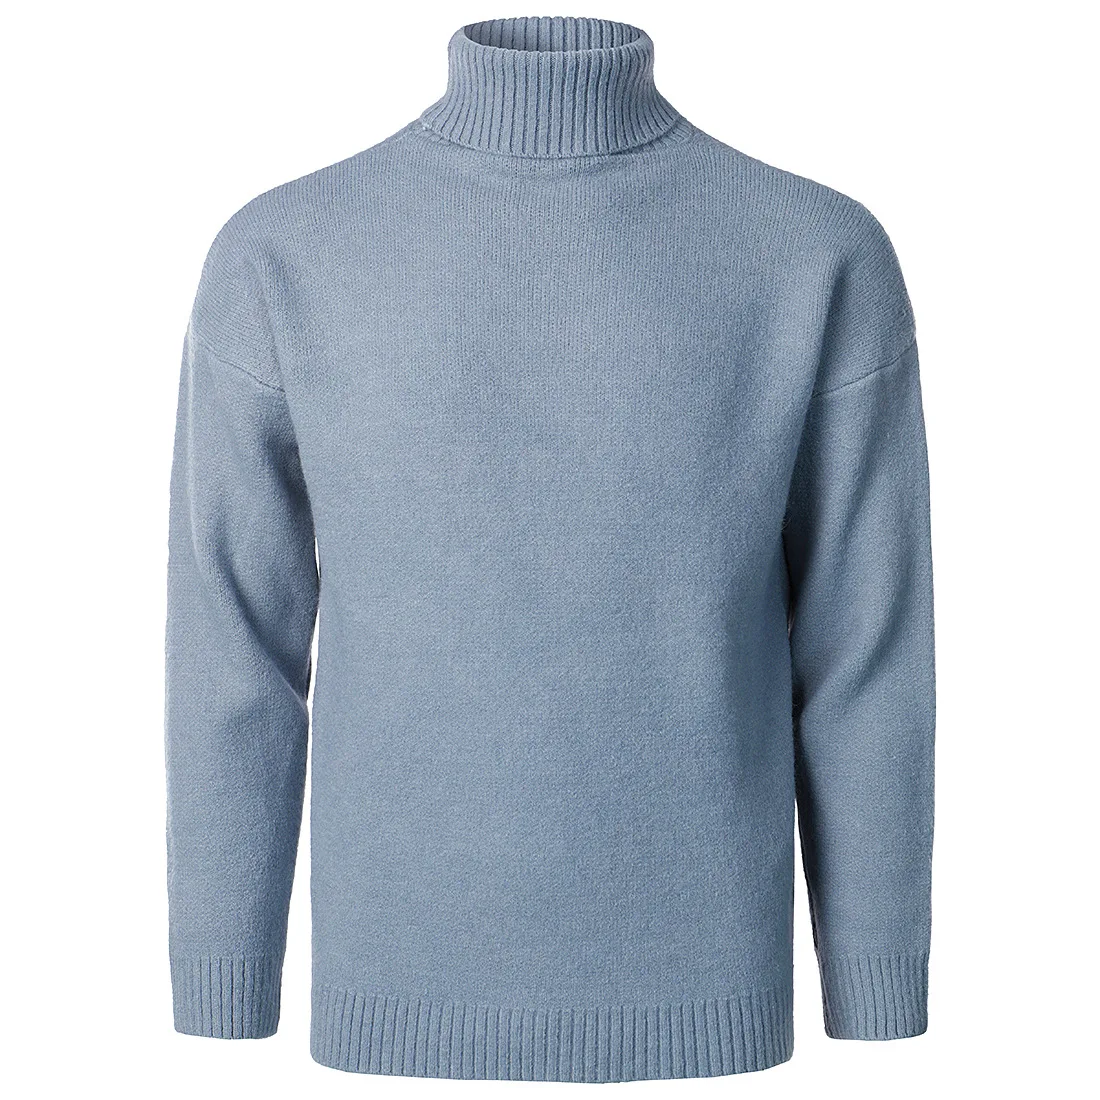 Mens Causal O Neck Sweater  Autumn Winter Christmas Pullover Knitted Sweaters